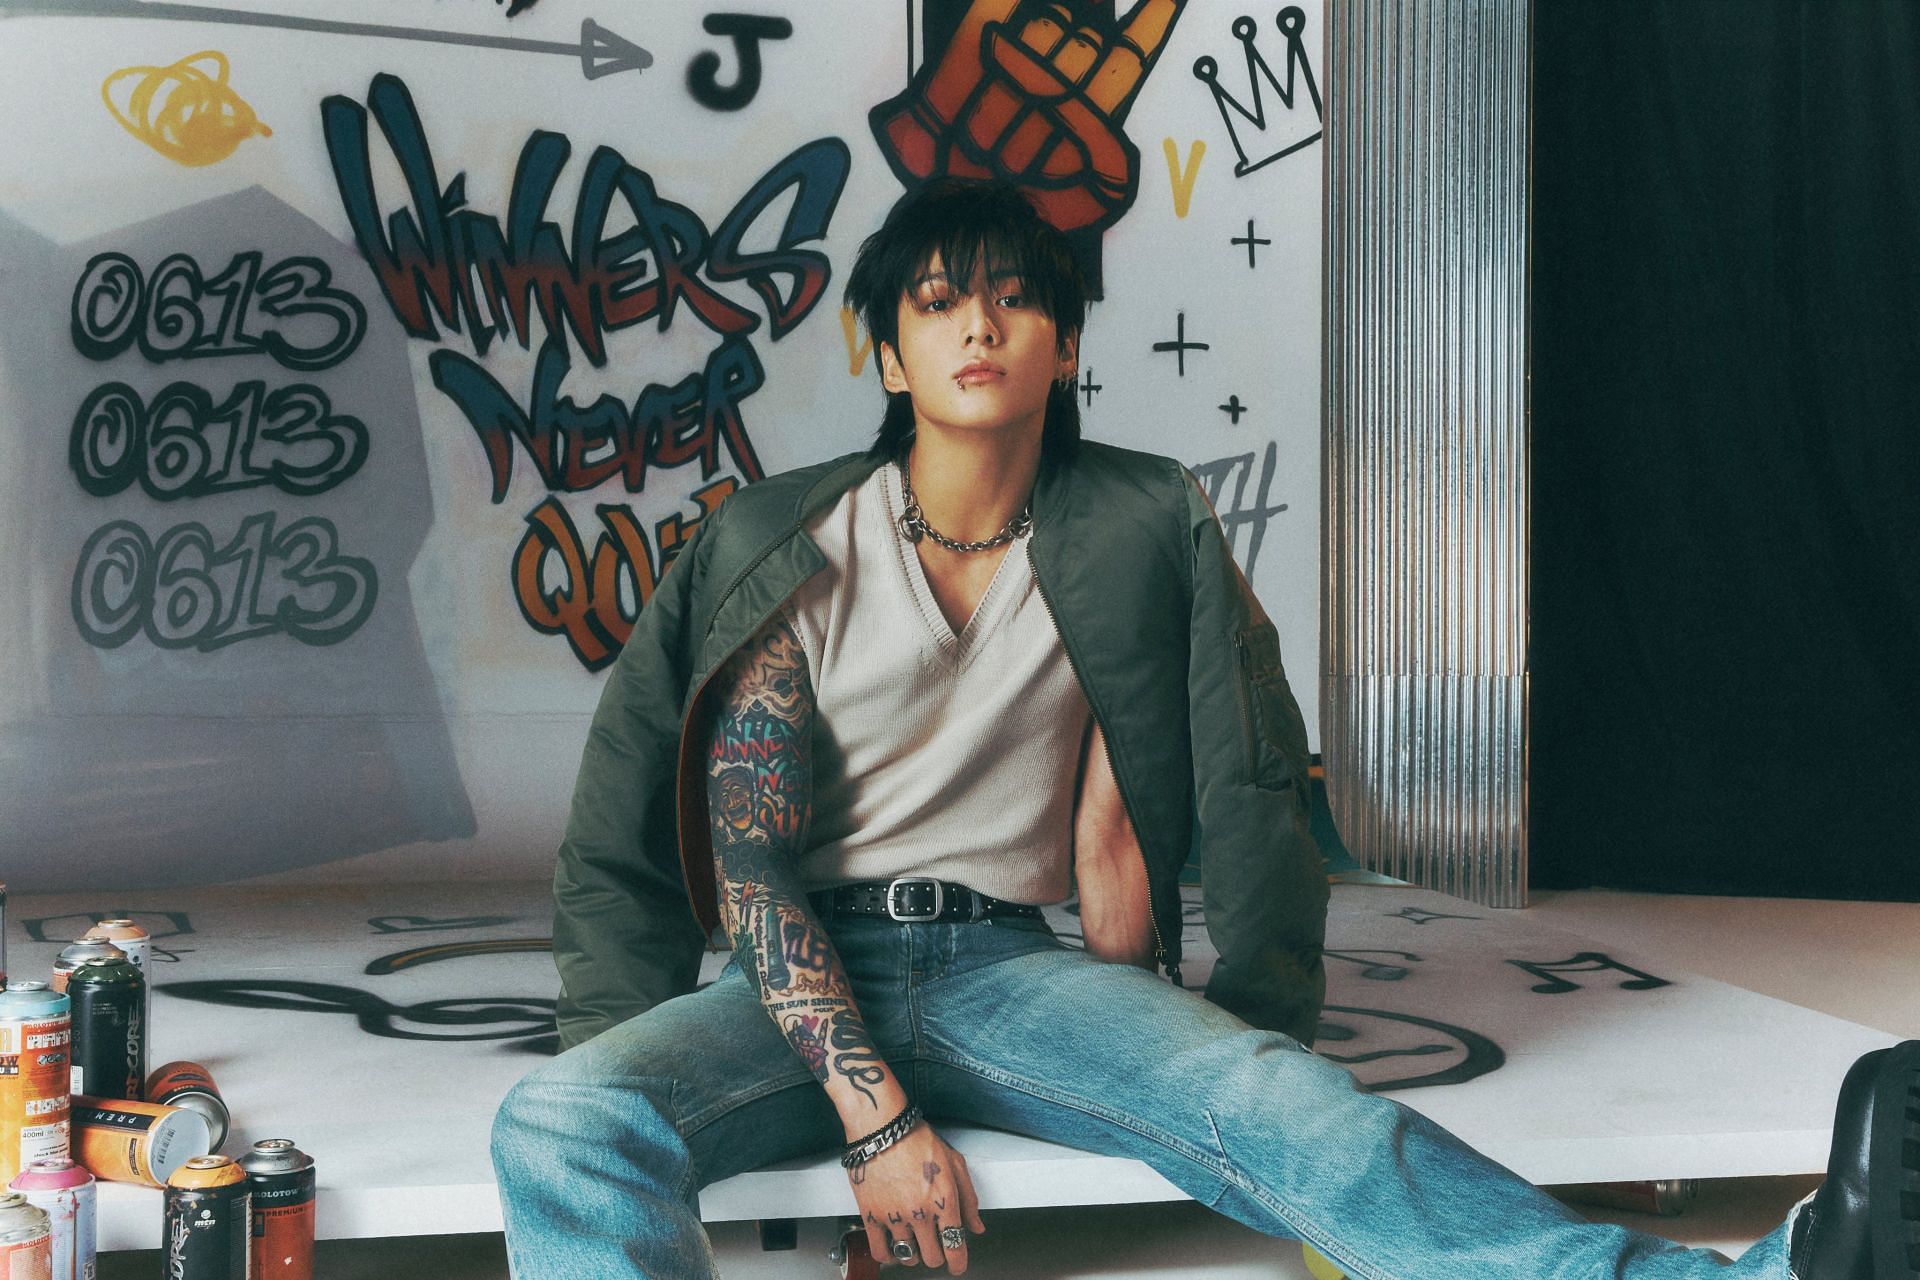 BTS&rsquo; Jungkook dominates Spotify weekly top songs Charts, secures #1 spot under HYBE Corporation with 1,769M streams overall  (Image via Big Hit Music/Twitter)